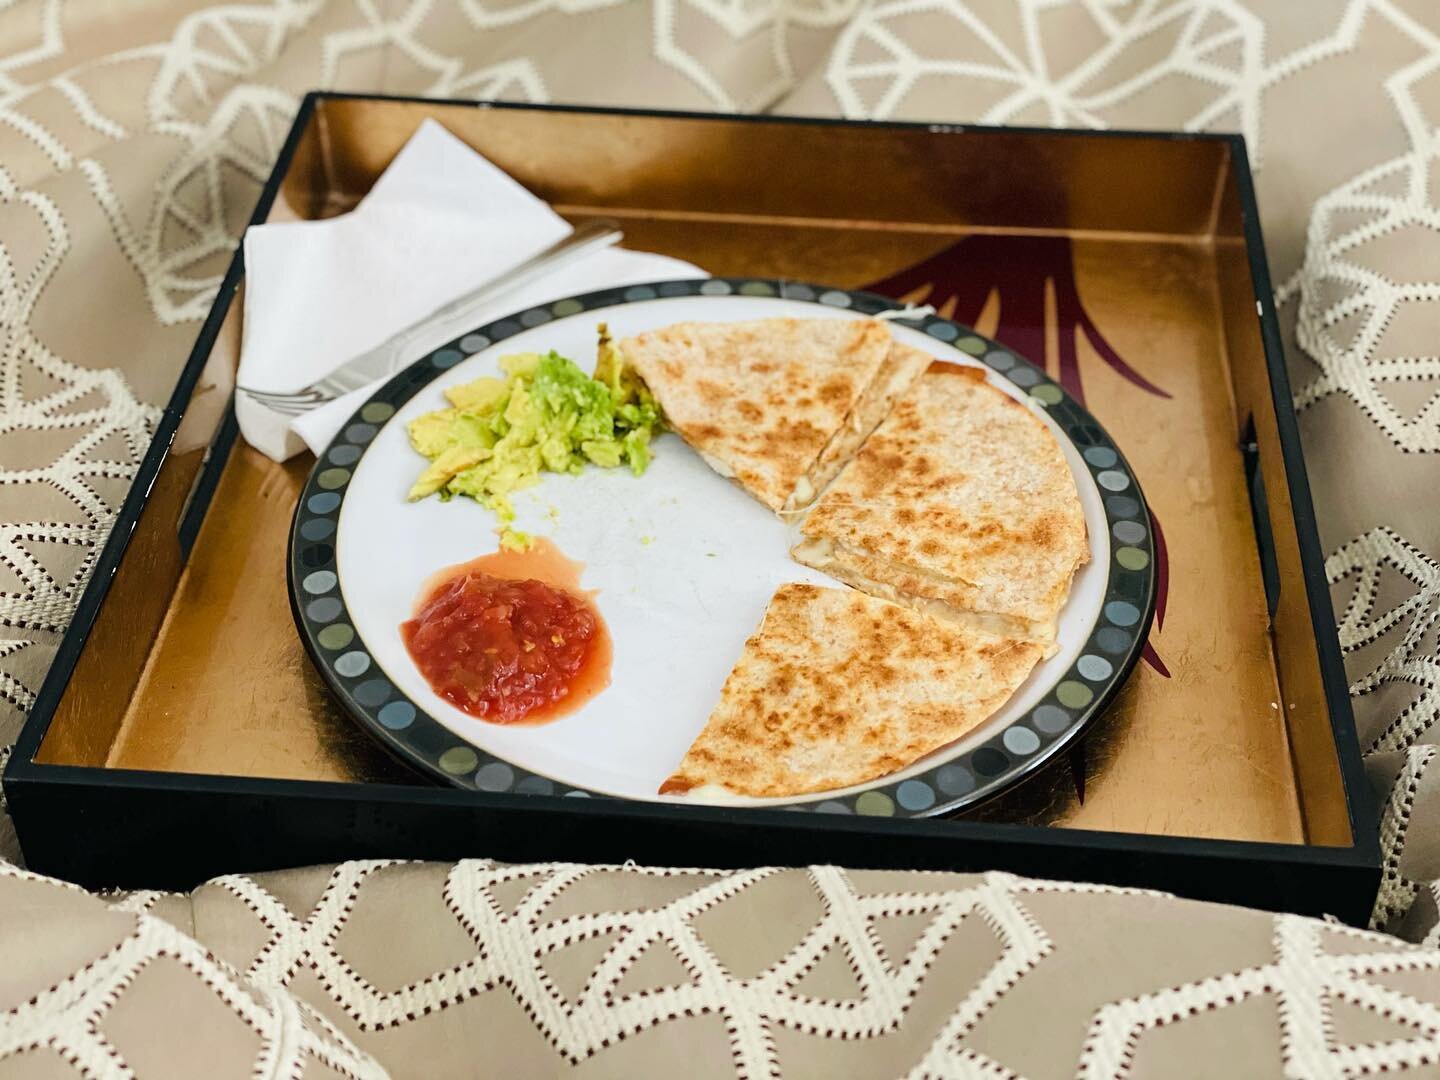 I am a grateful recipient of this delicious chicken quesadilla made especially for me (as requested) and brought to my room, by my 12 yr old who has mad kitchen skillz. 

Typically I&rsquo;m not a fan of food in the bedrooms! 🤮. But, resting after m